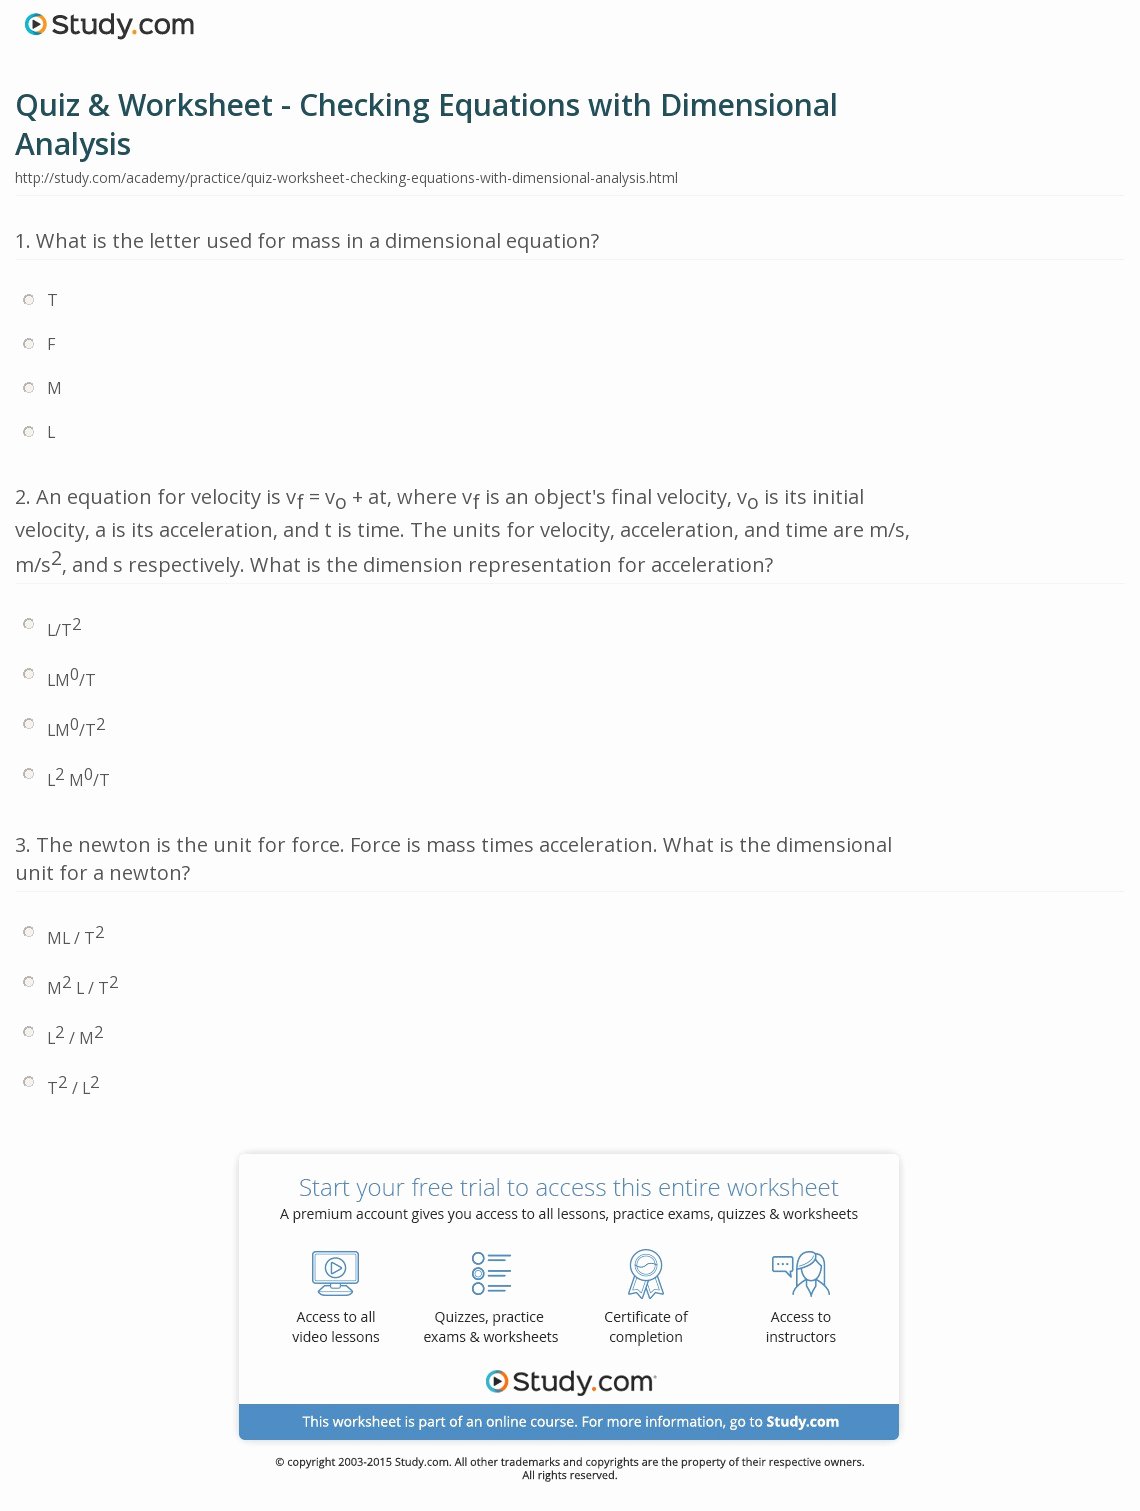 Dimensional Analysis Worksheet Answers Inspirational Quiz &amp; Worksheet Checking Equations with Dimensional